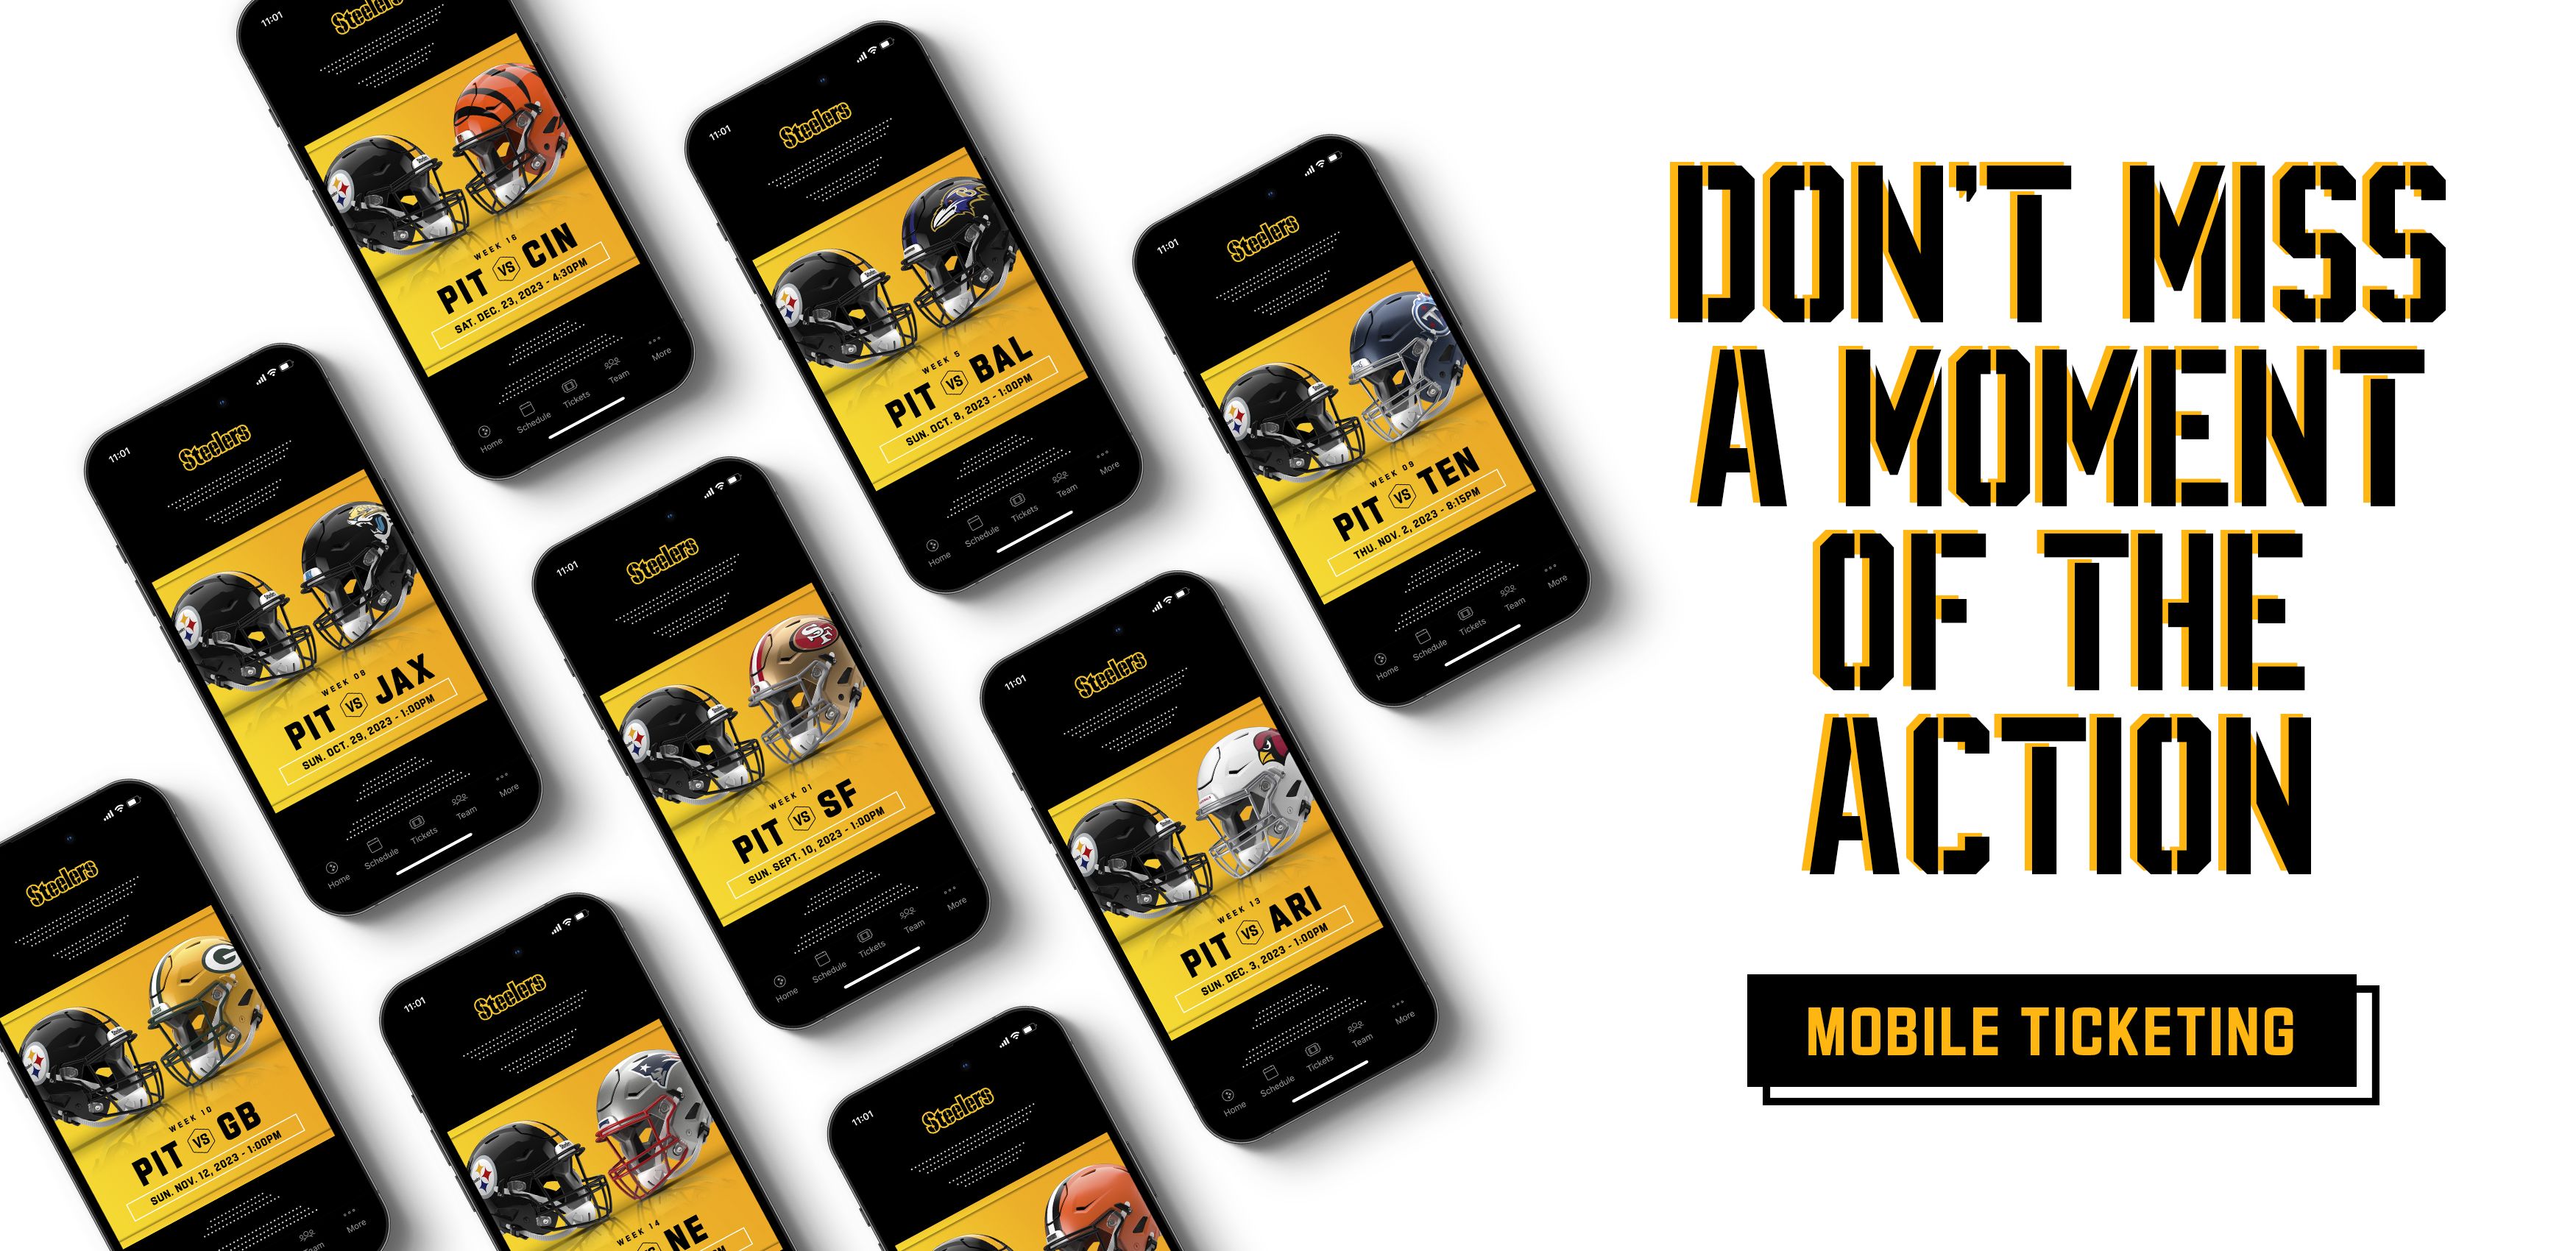 The Official Mobile App of the Pittsburgh Steelers